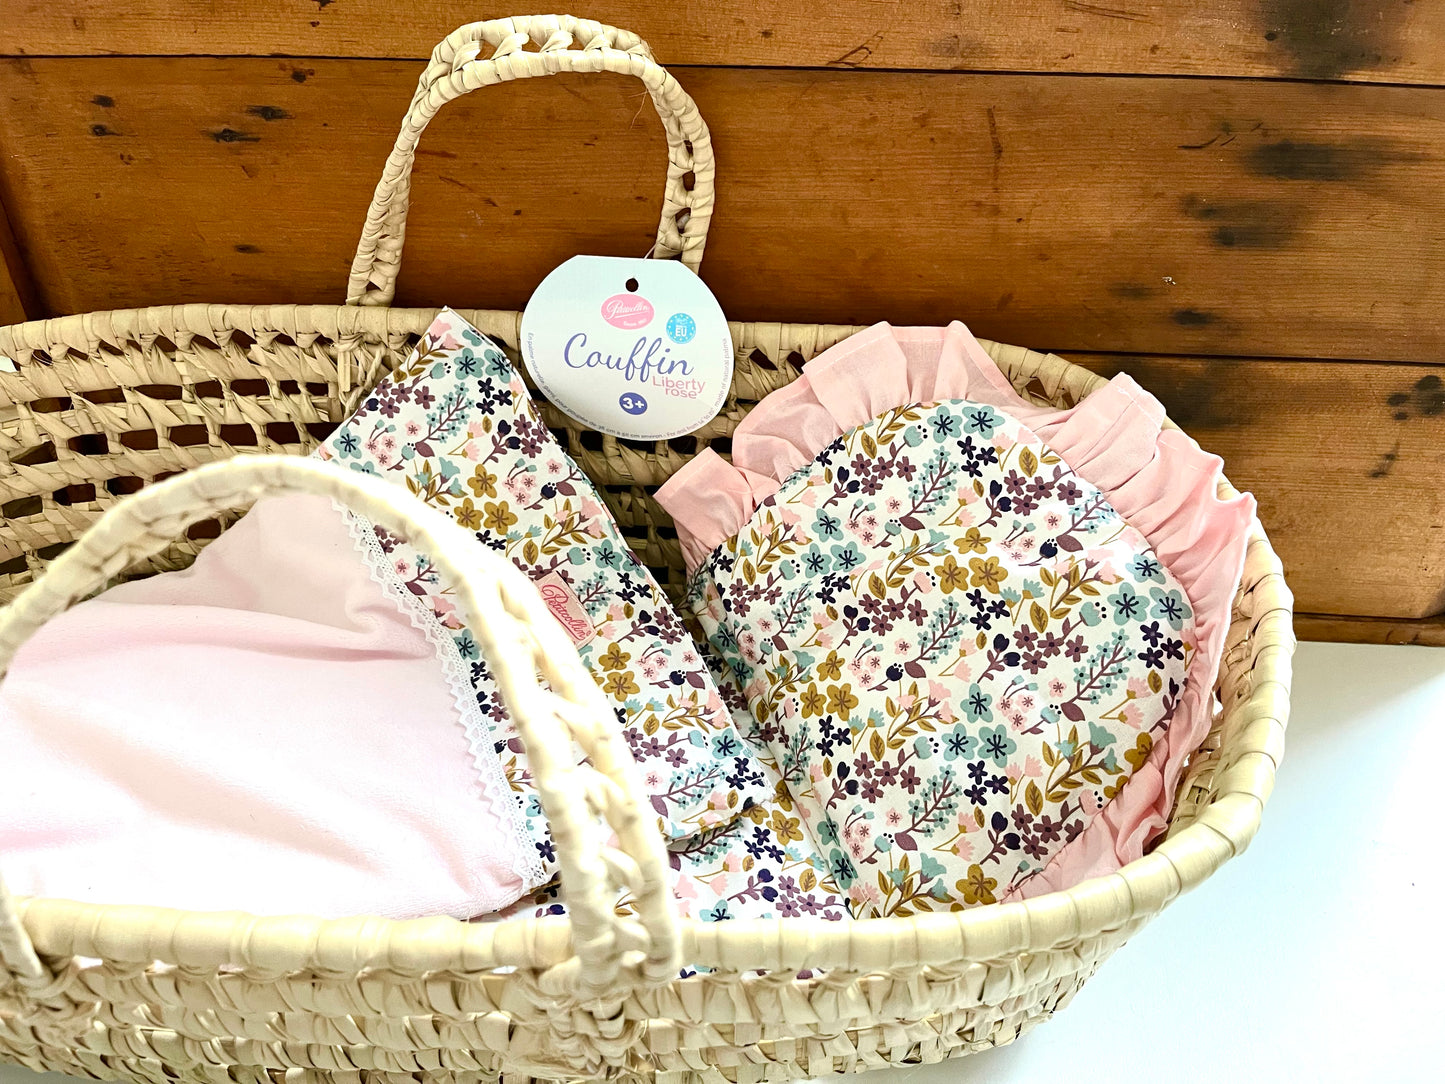 Dolls, Beds and Carriers - MOSES BASKET, Large, with BEDDING!